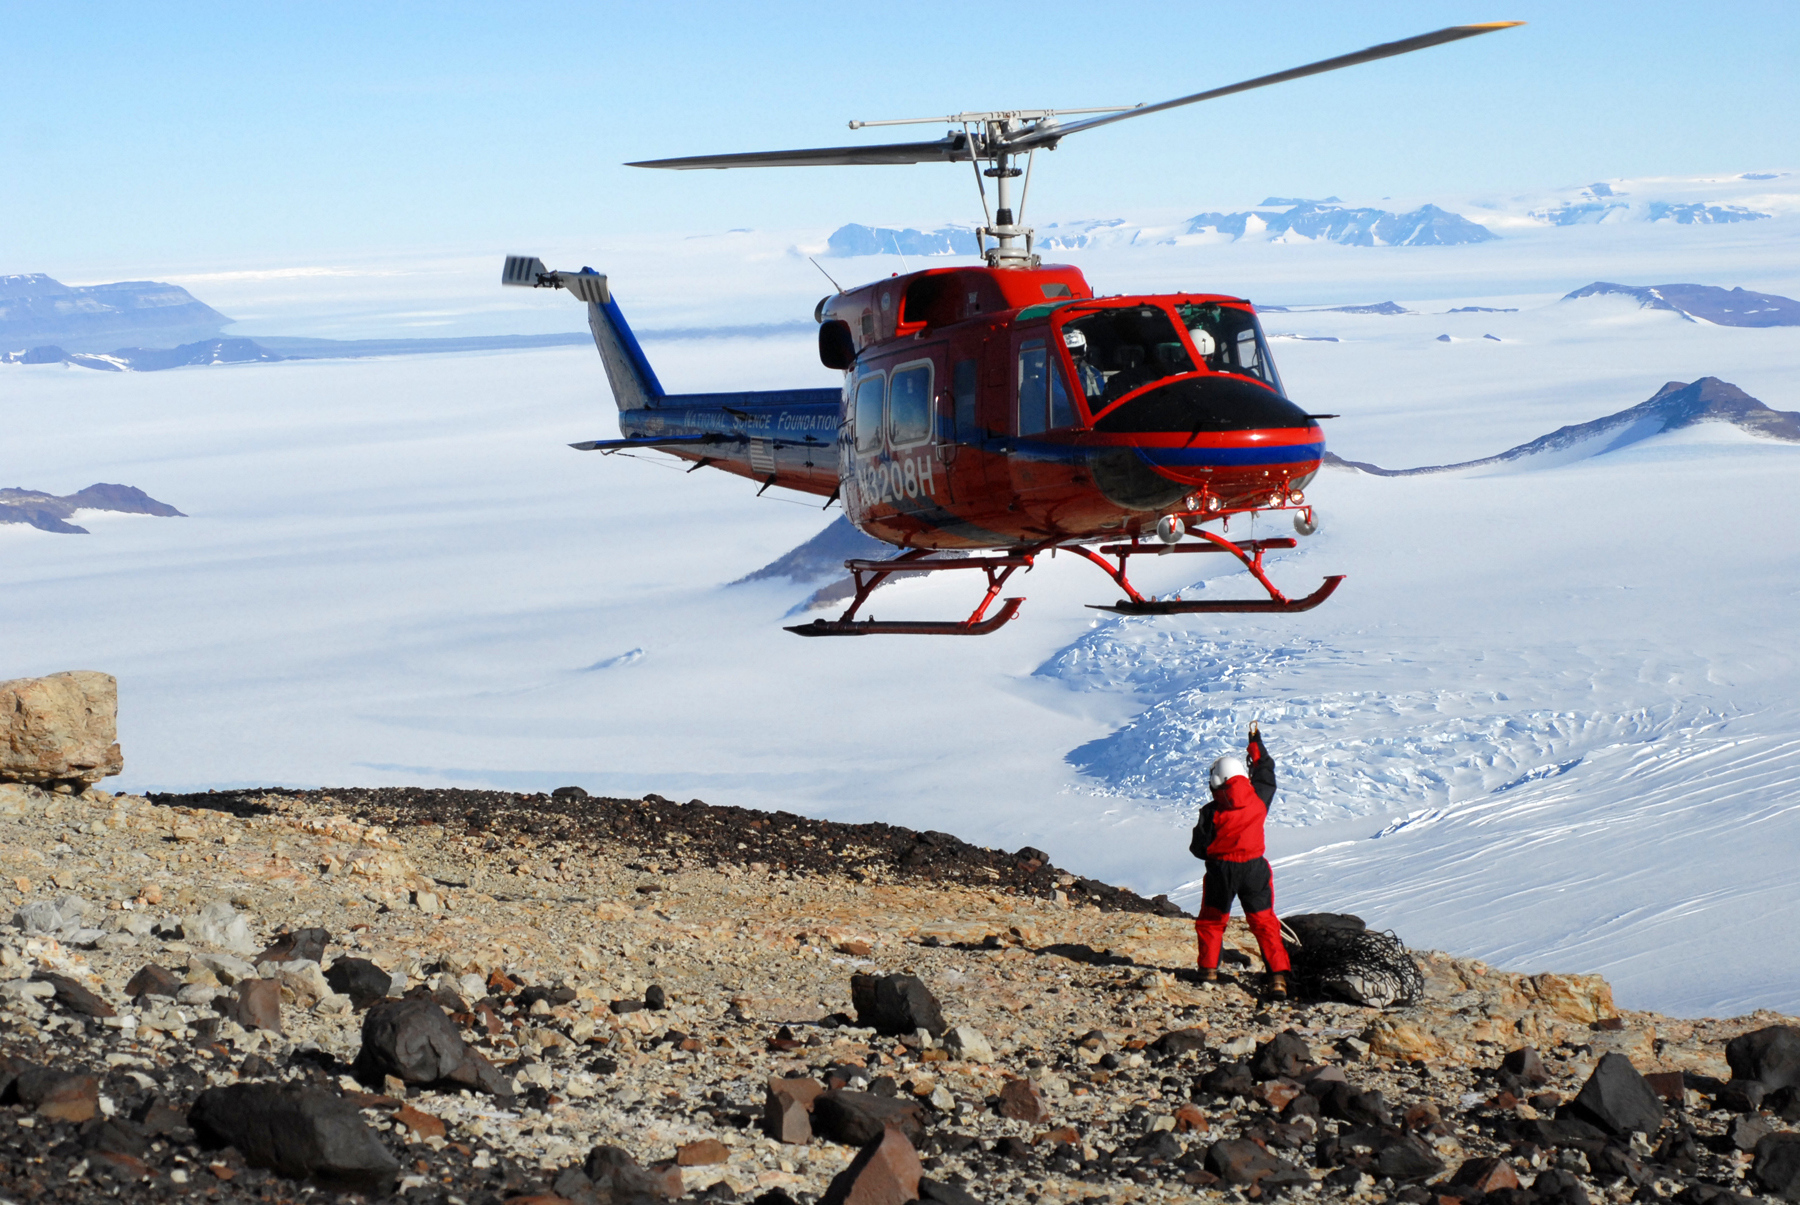 A red helicopter hovers close to the ground, which is rocky in the foreground and an expanse of snow in the background. A person dressed in a red snowsuit and helmet reaches a hand up towards the helicopter to attach a cargo net with fossils.